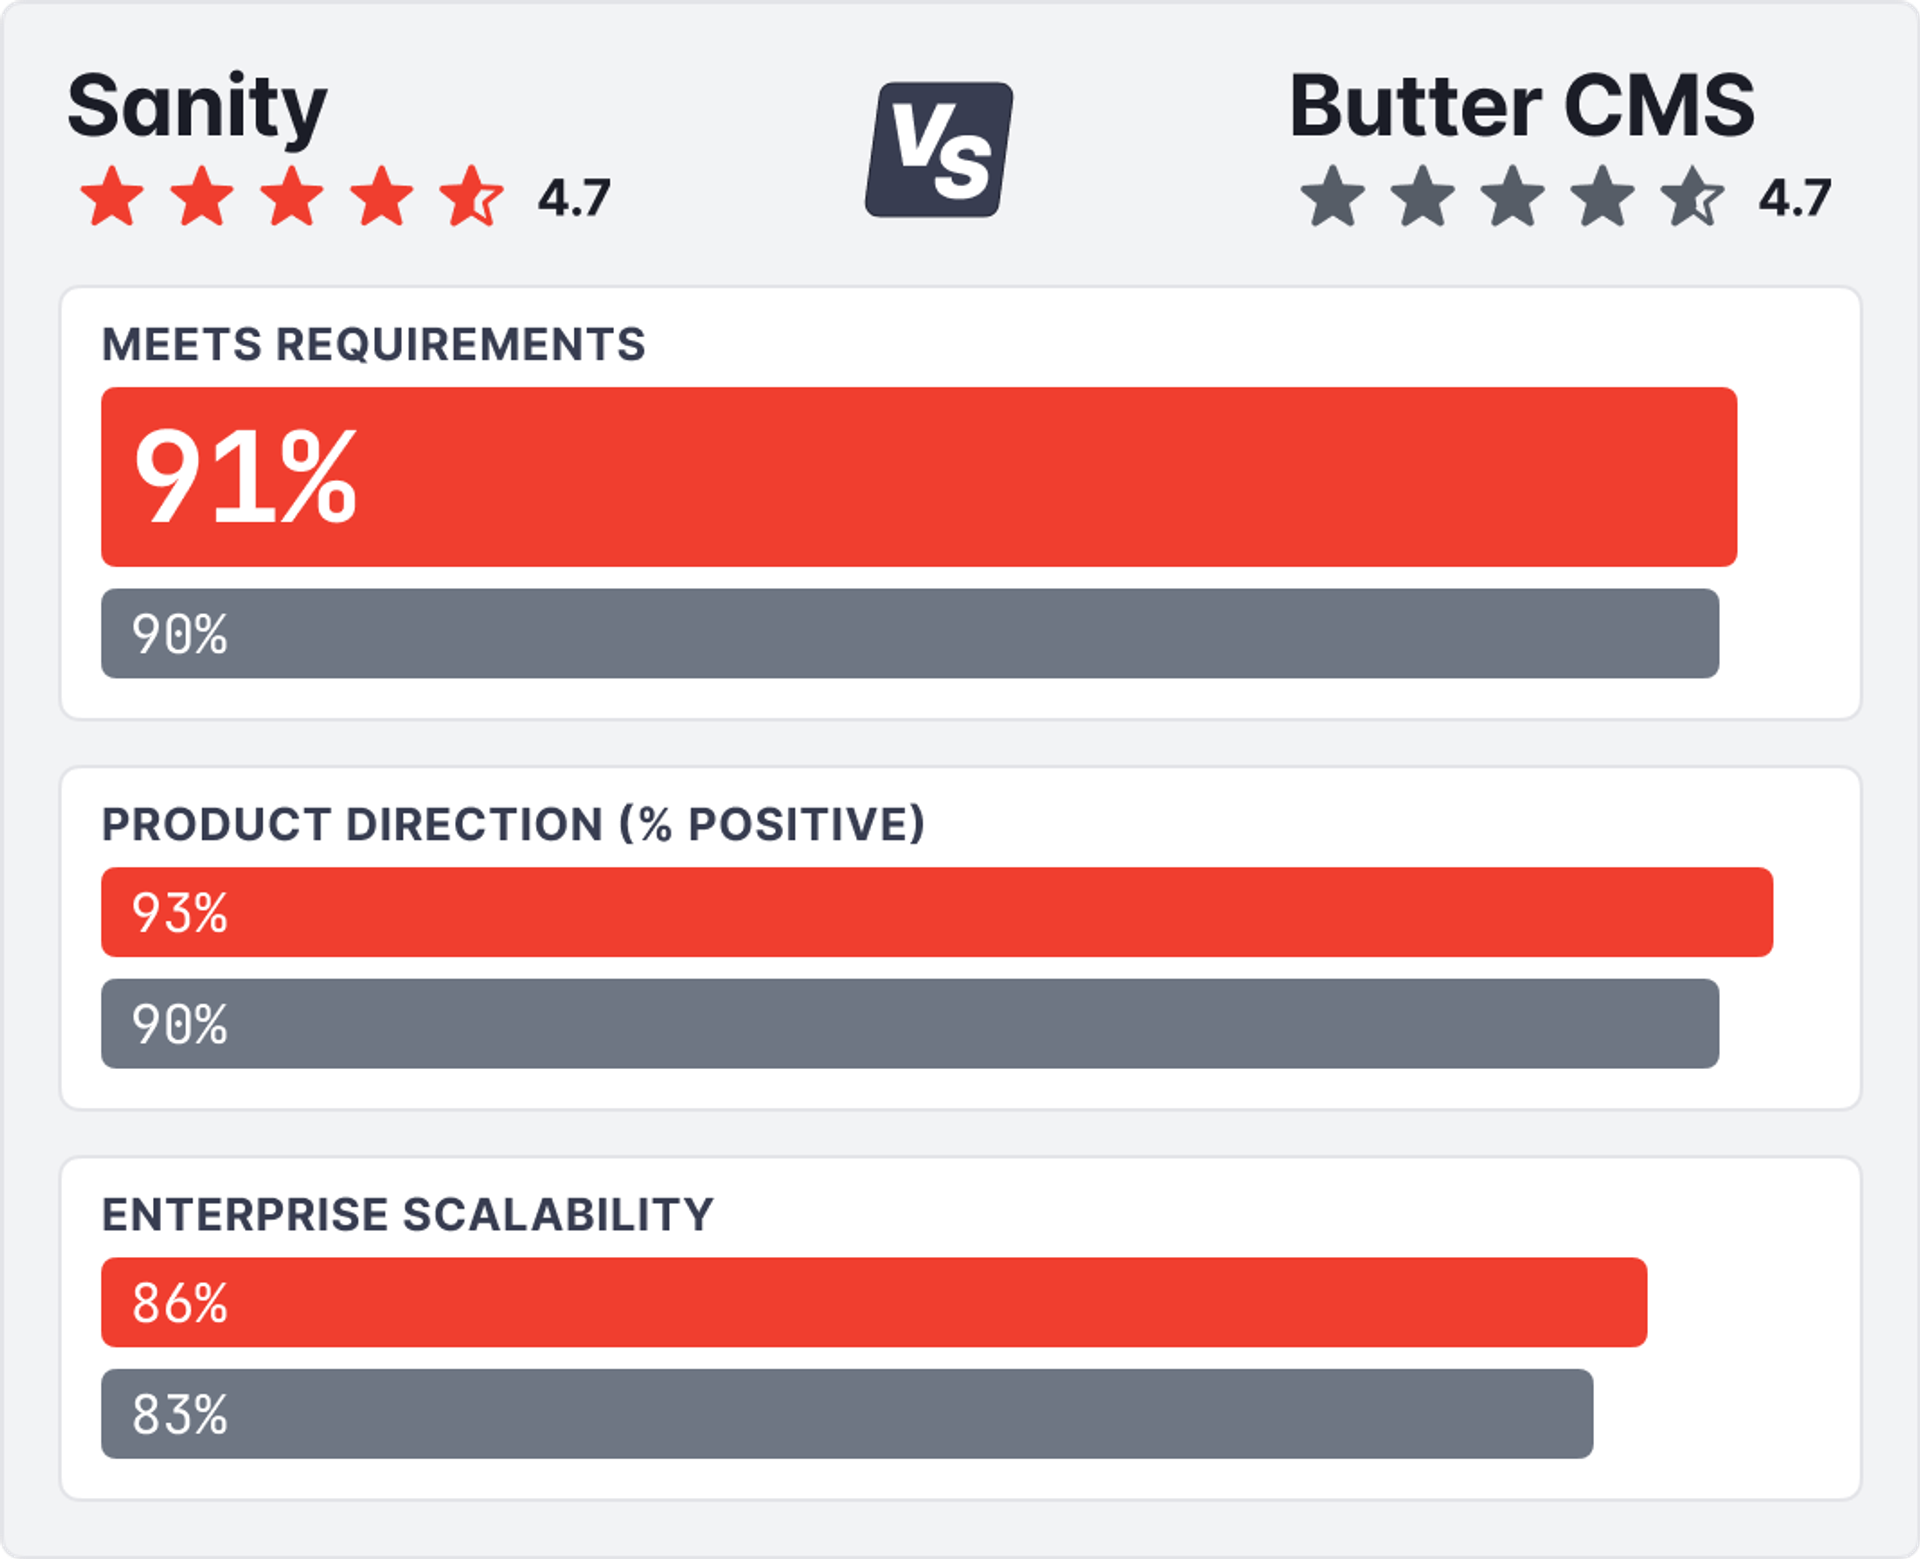 a chart showing the feature differences between sanity and butter cms